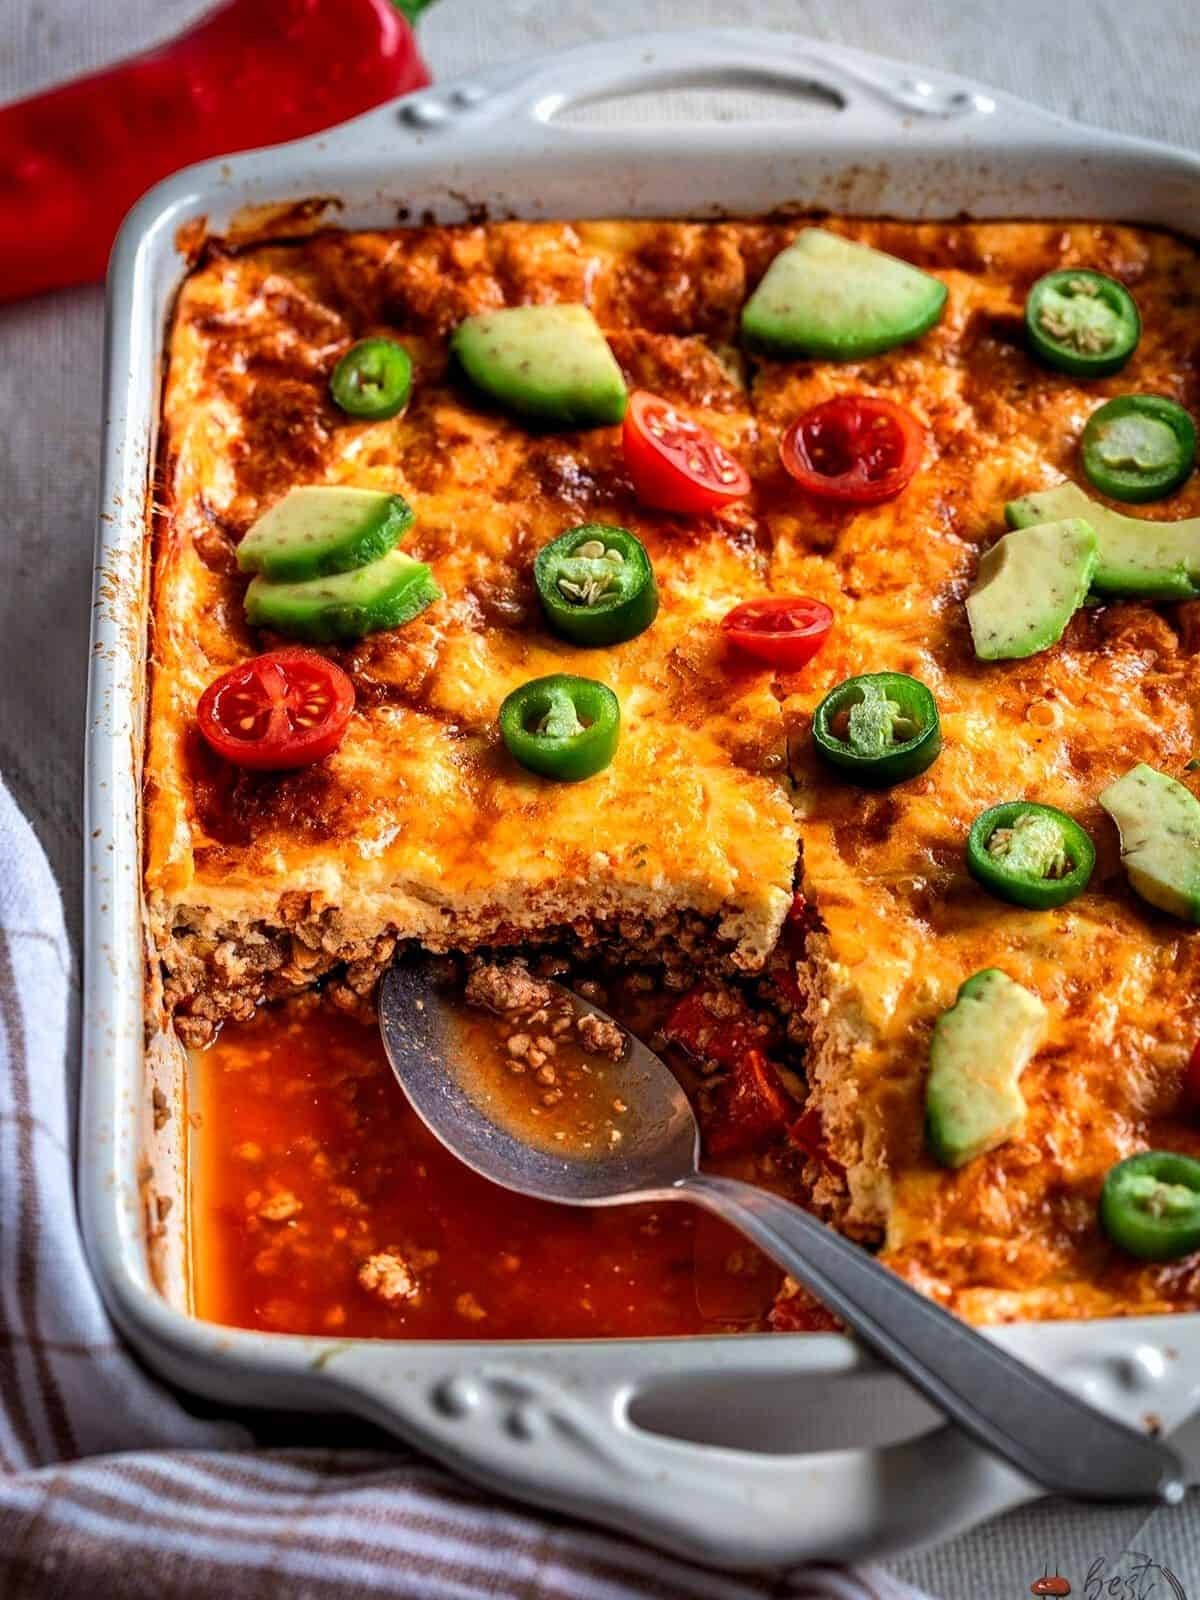 Taco casserole in a baking dish with one portion taken out.